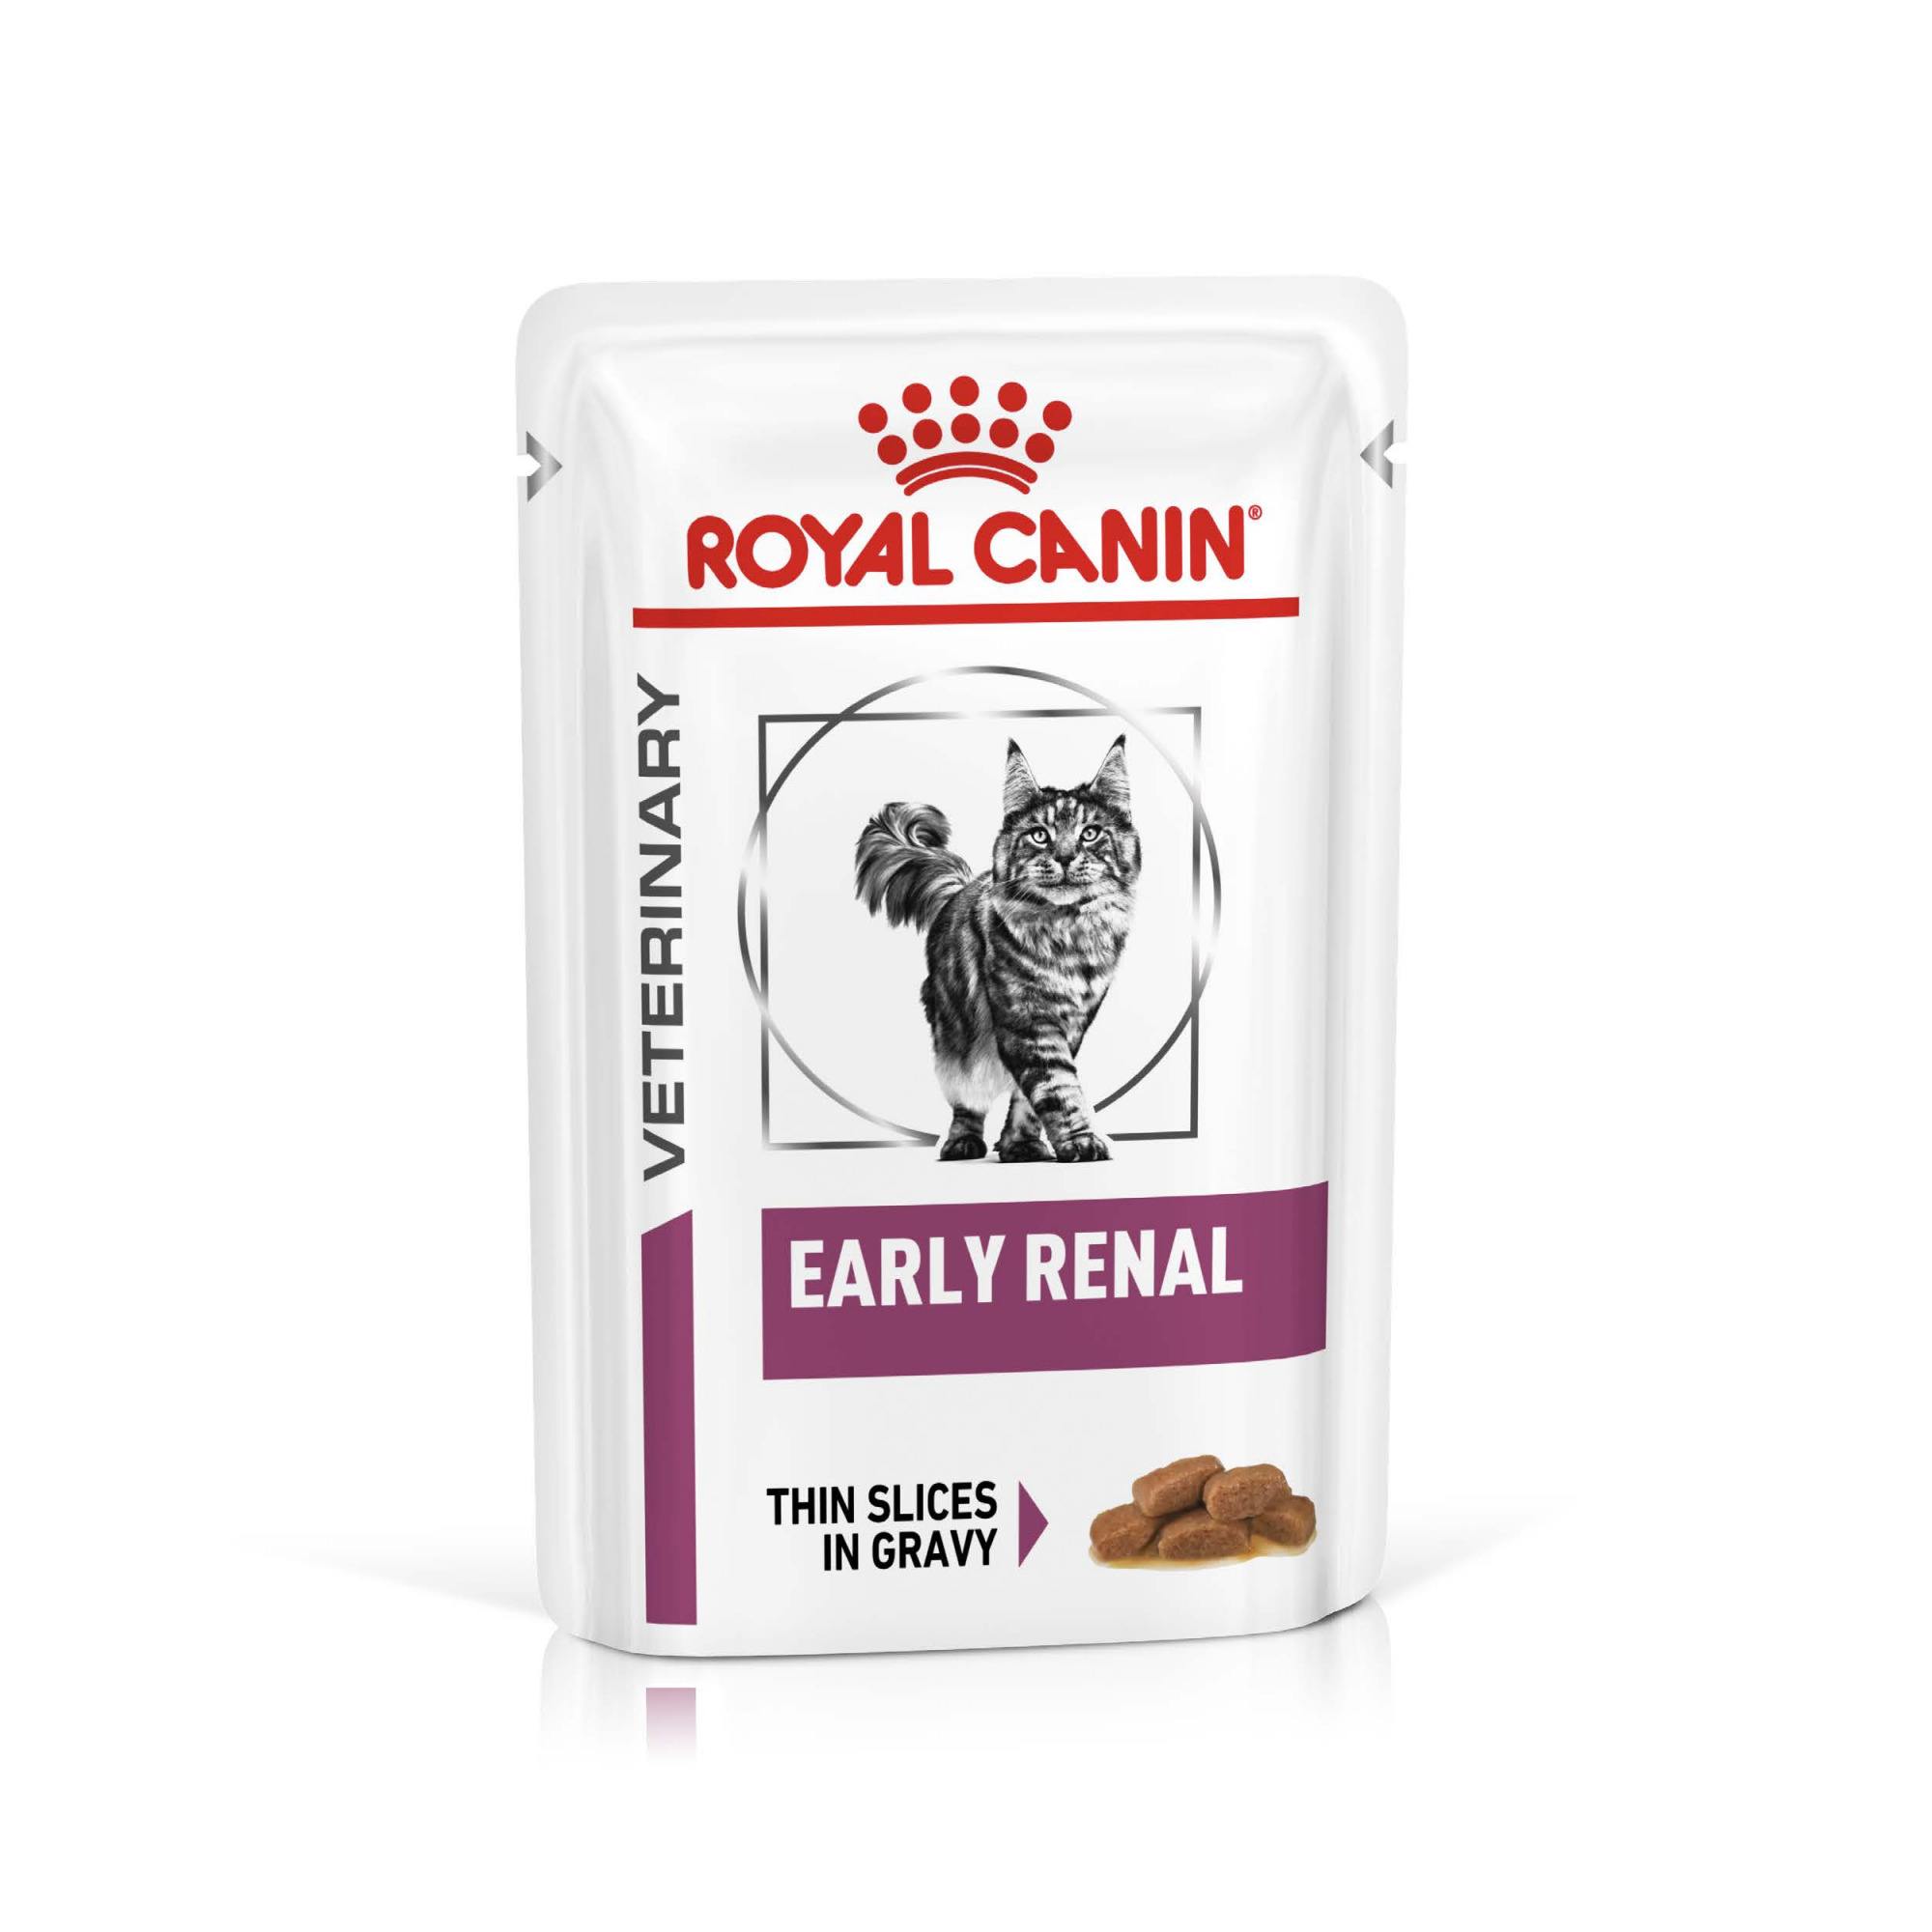 ROYAL CANIN® Early Renal Adult Wet Cat Food